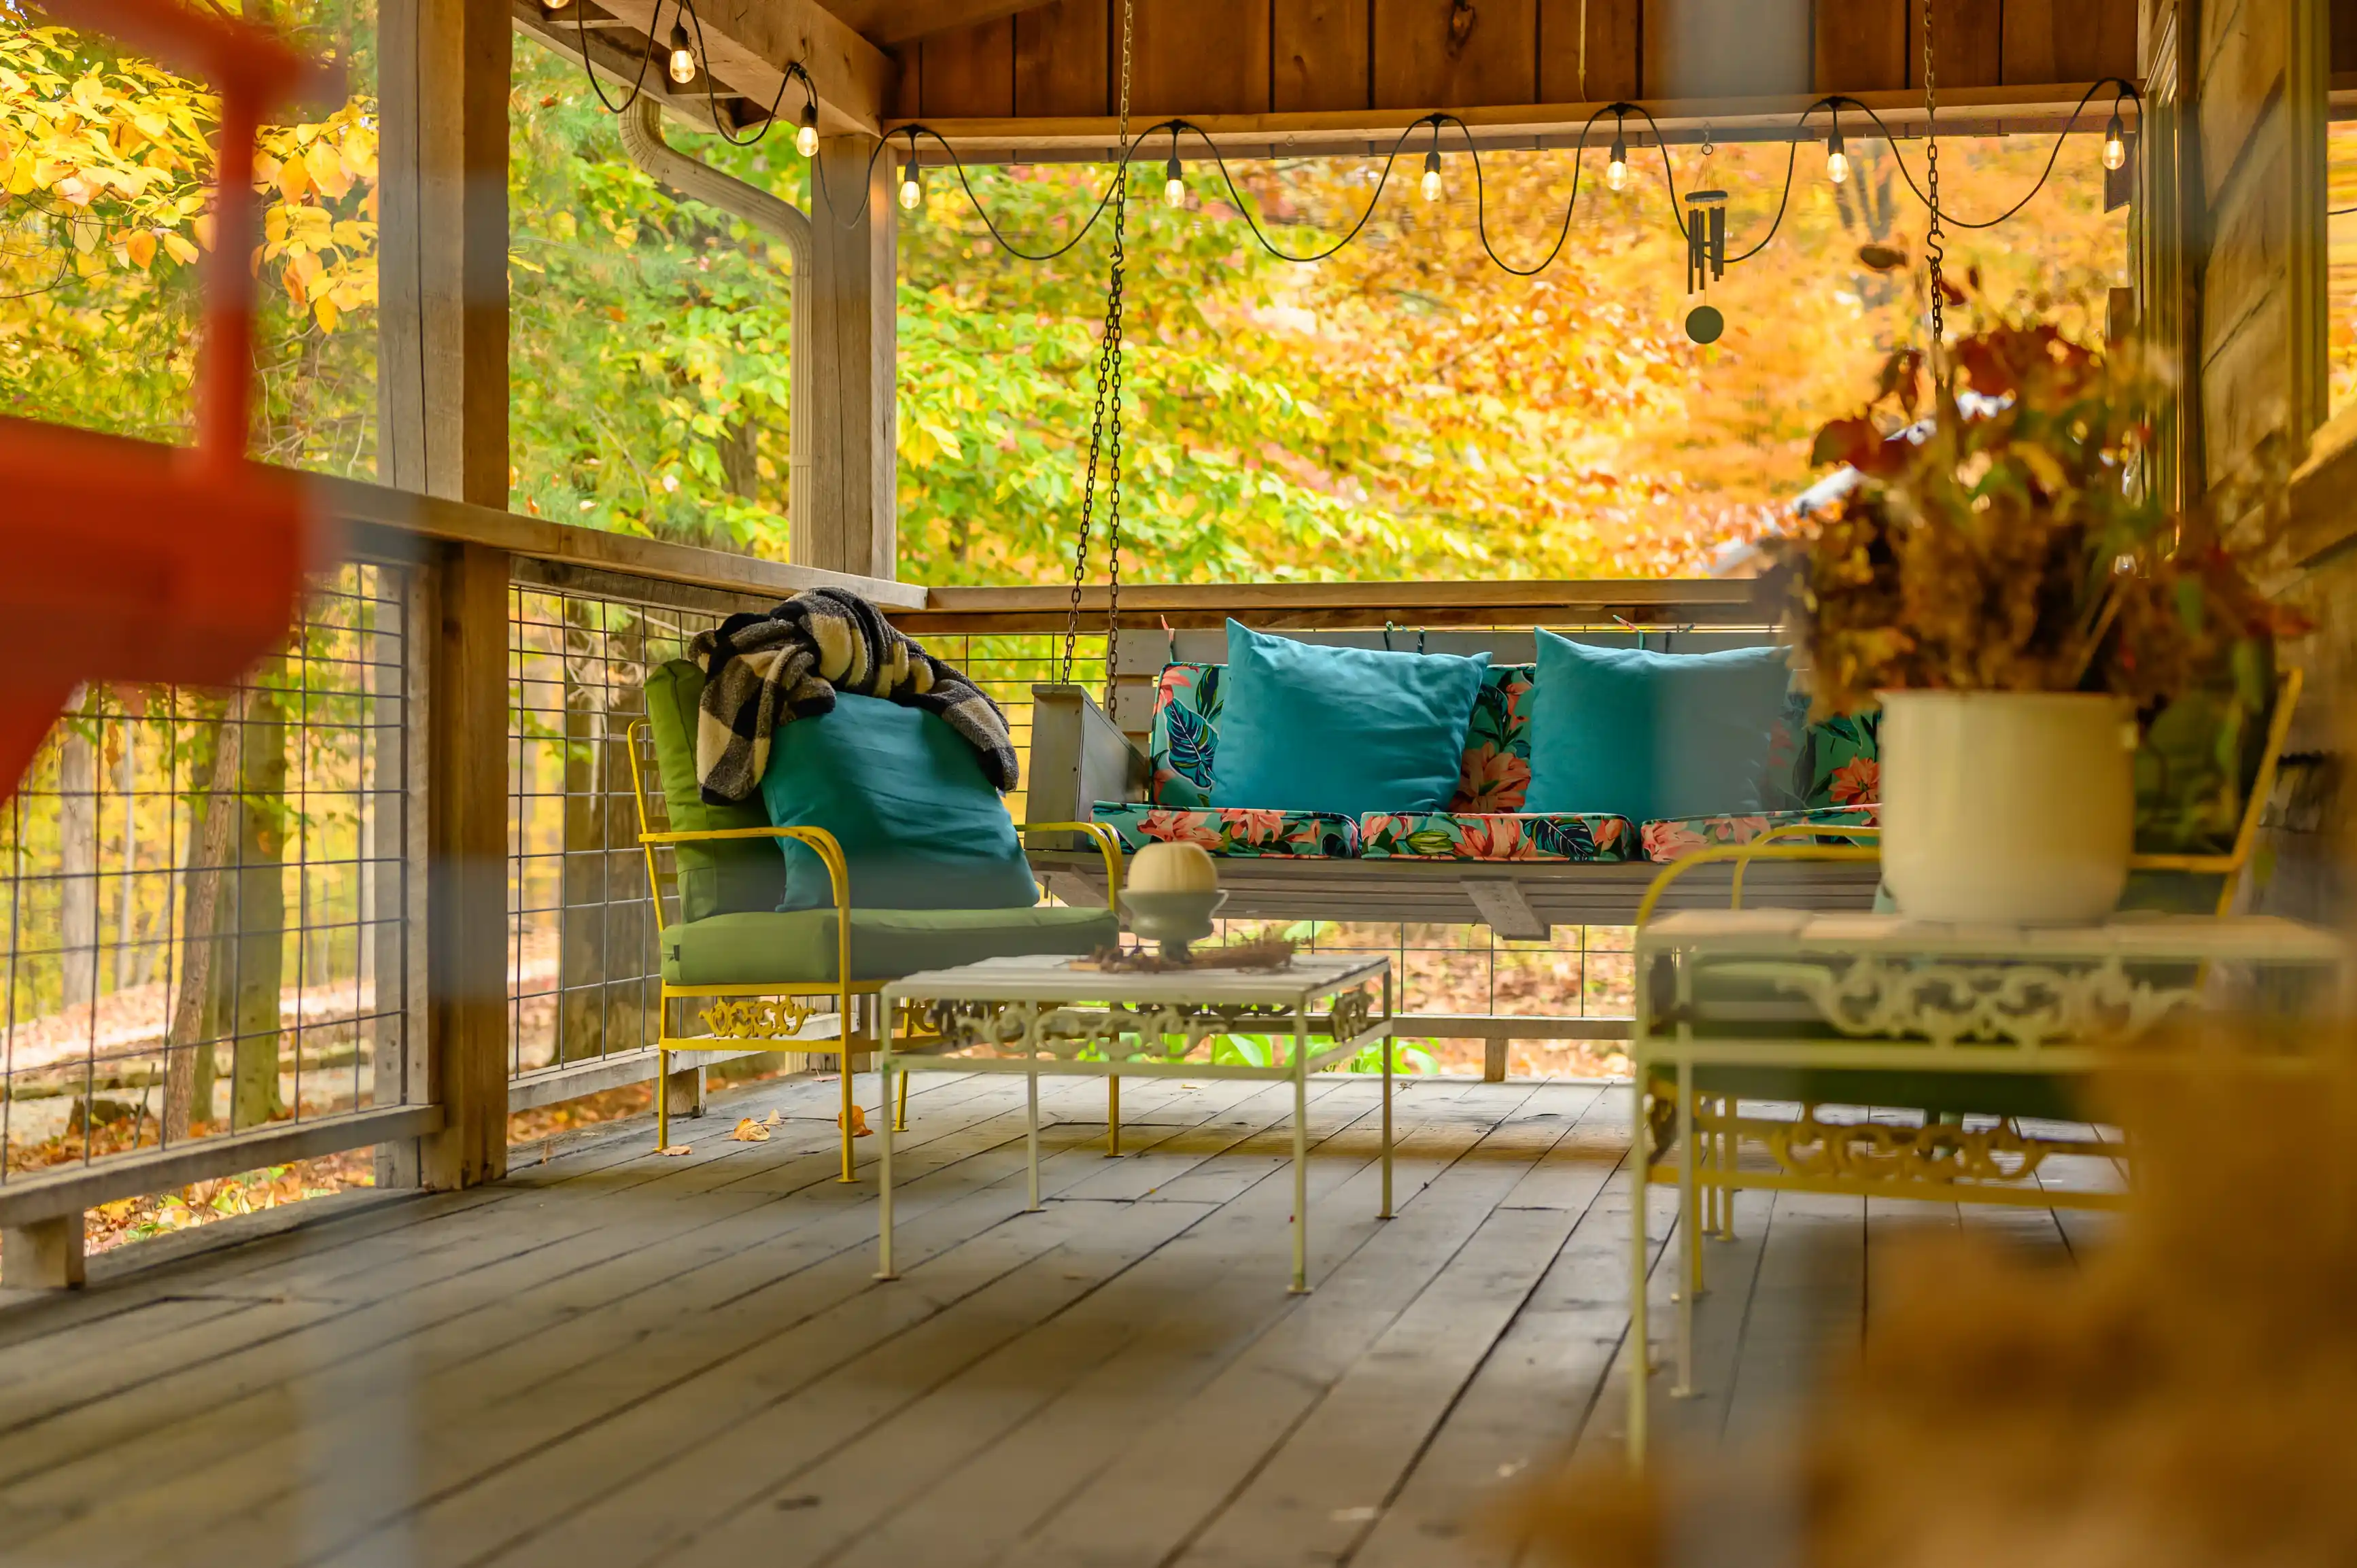 Cozy, covered porch with a swinging bench adorned with blue cushions and a plaid blanket, surrounded by autumnal trees, featuring string lights and a tabletop with a potted plant.